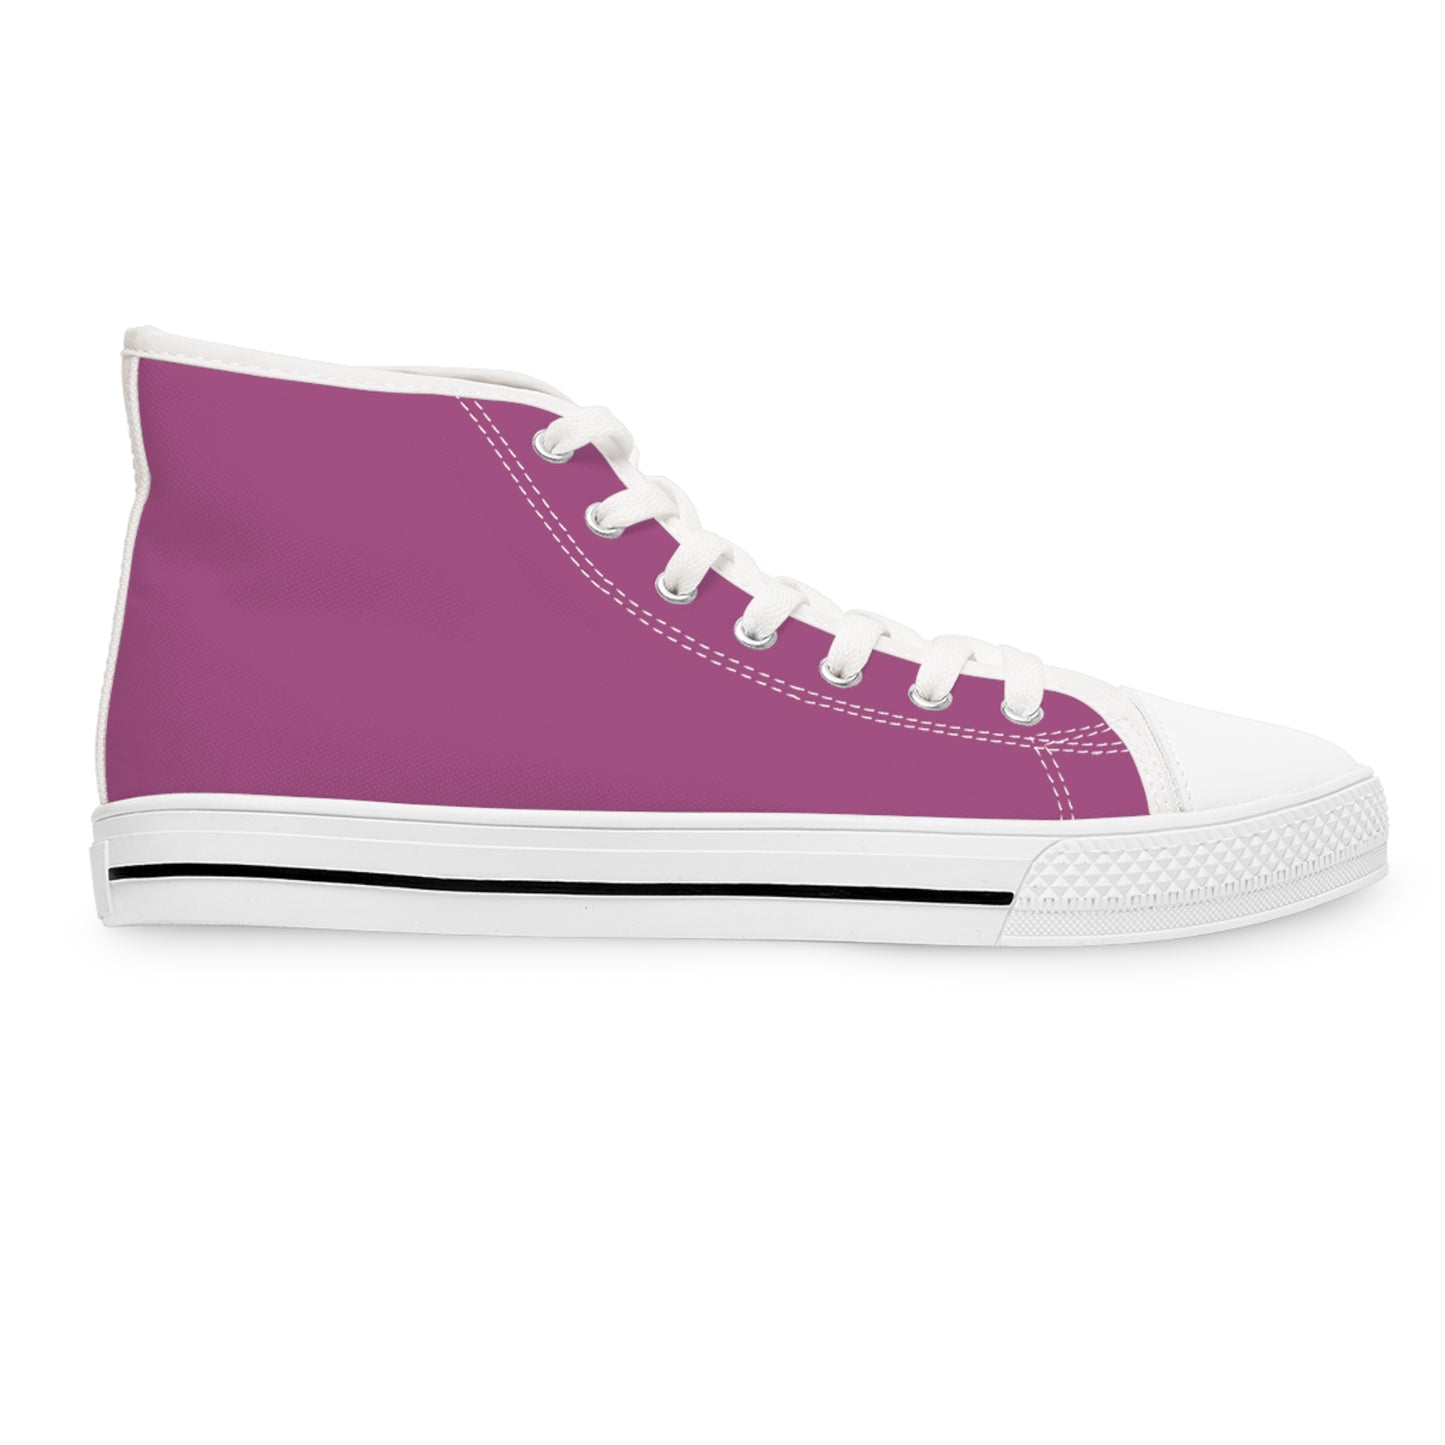 Women's Canvas High Top Solid Color Sneakers - Candy Wrapper Pink US 12 White sole